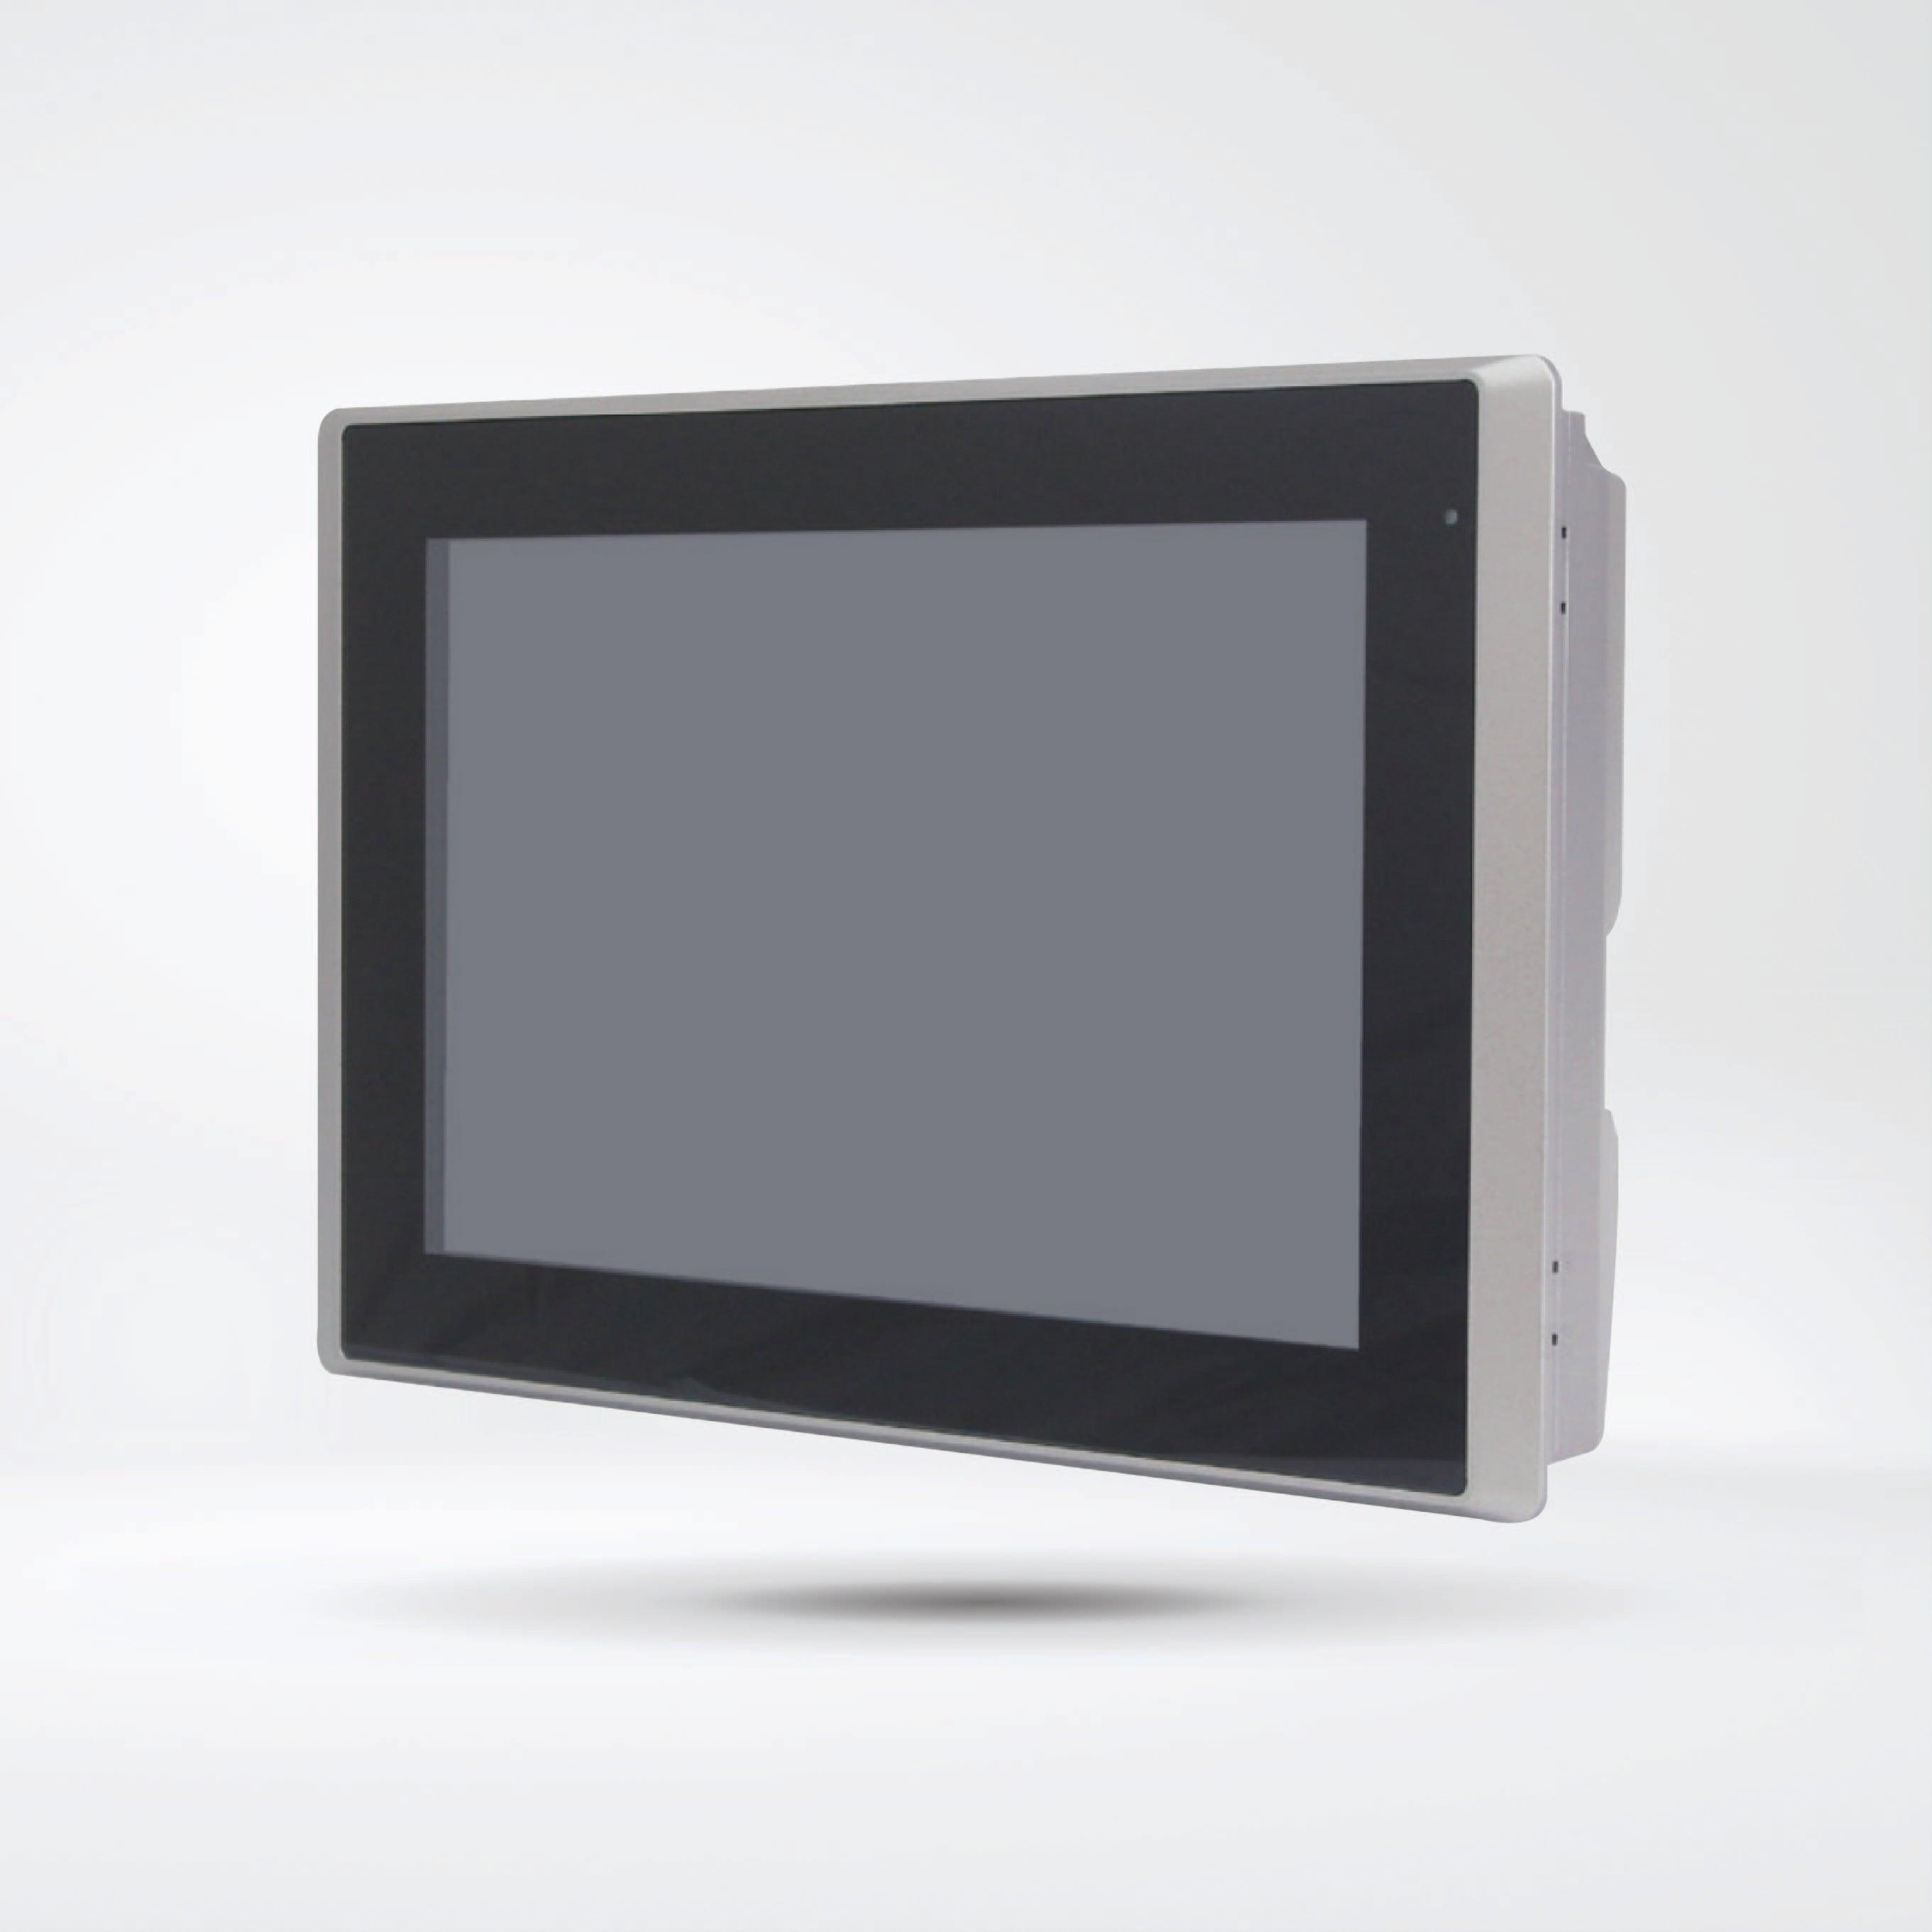 ARCHMI-810 New Generation Low Power Consumption HMI/Innovationg Fast, Bay Trail Solution - Riverplus